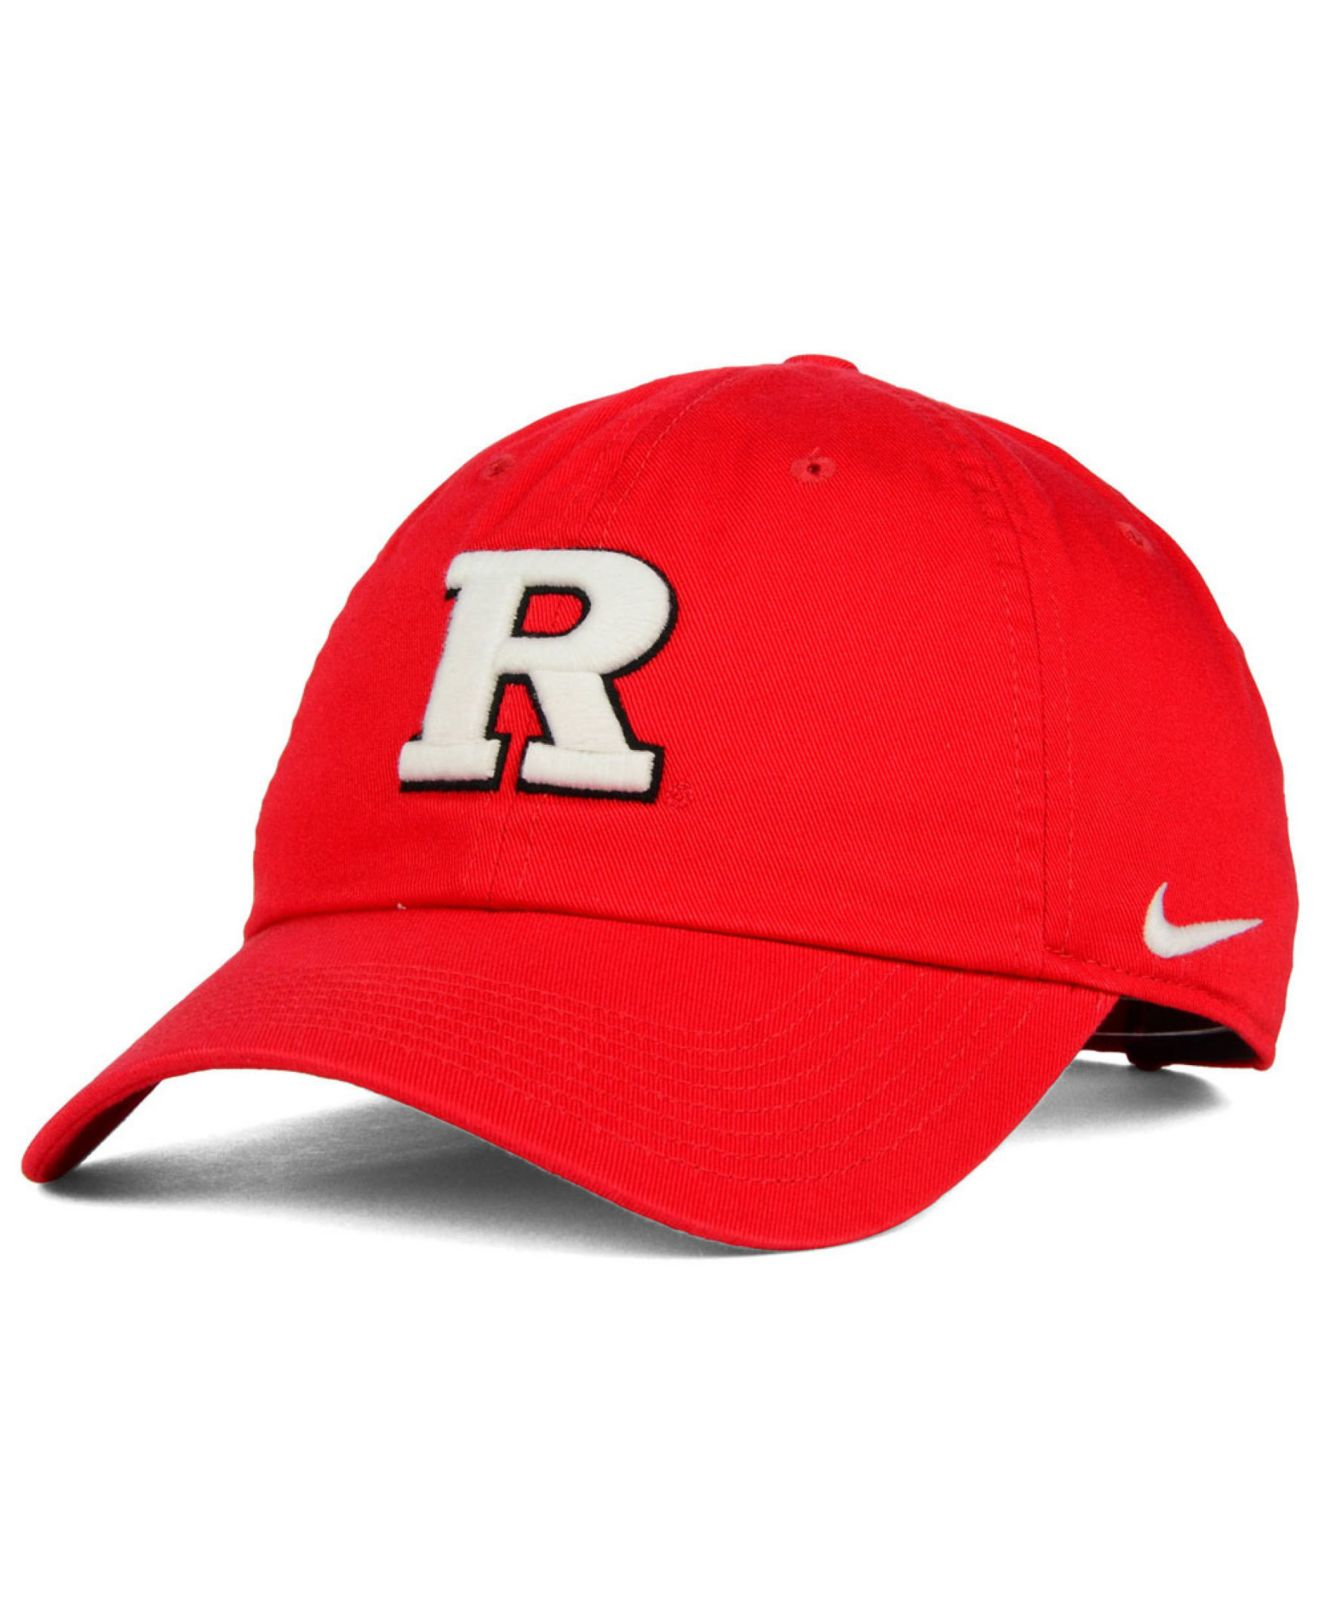 Lyst - Nike Rutgers Scarlet Knights Dri-fit Tailback Cap in Red for Men